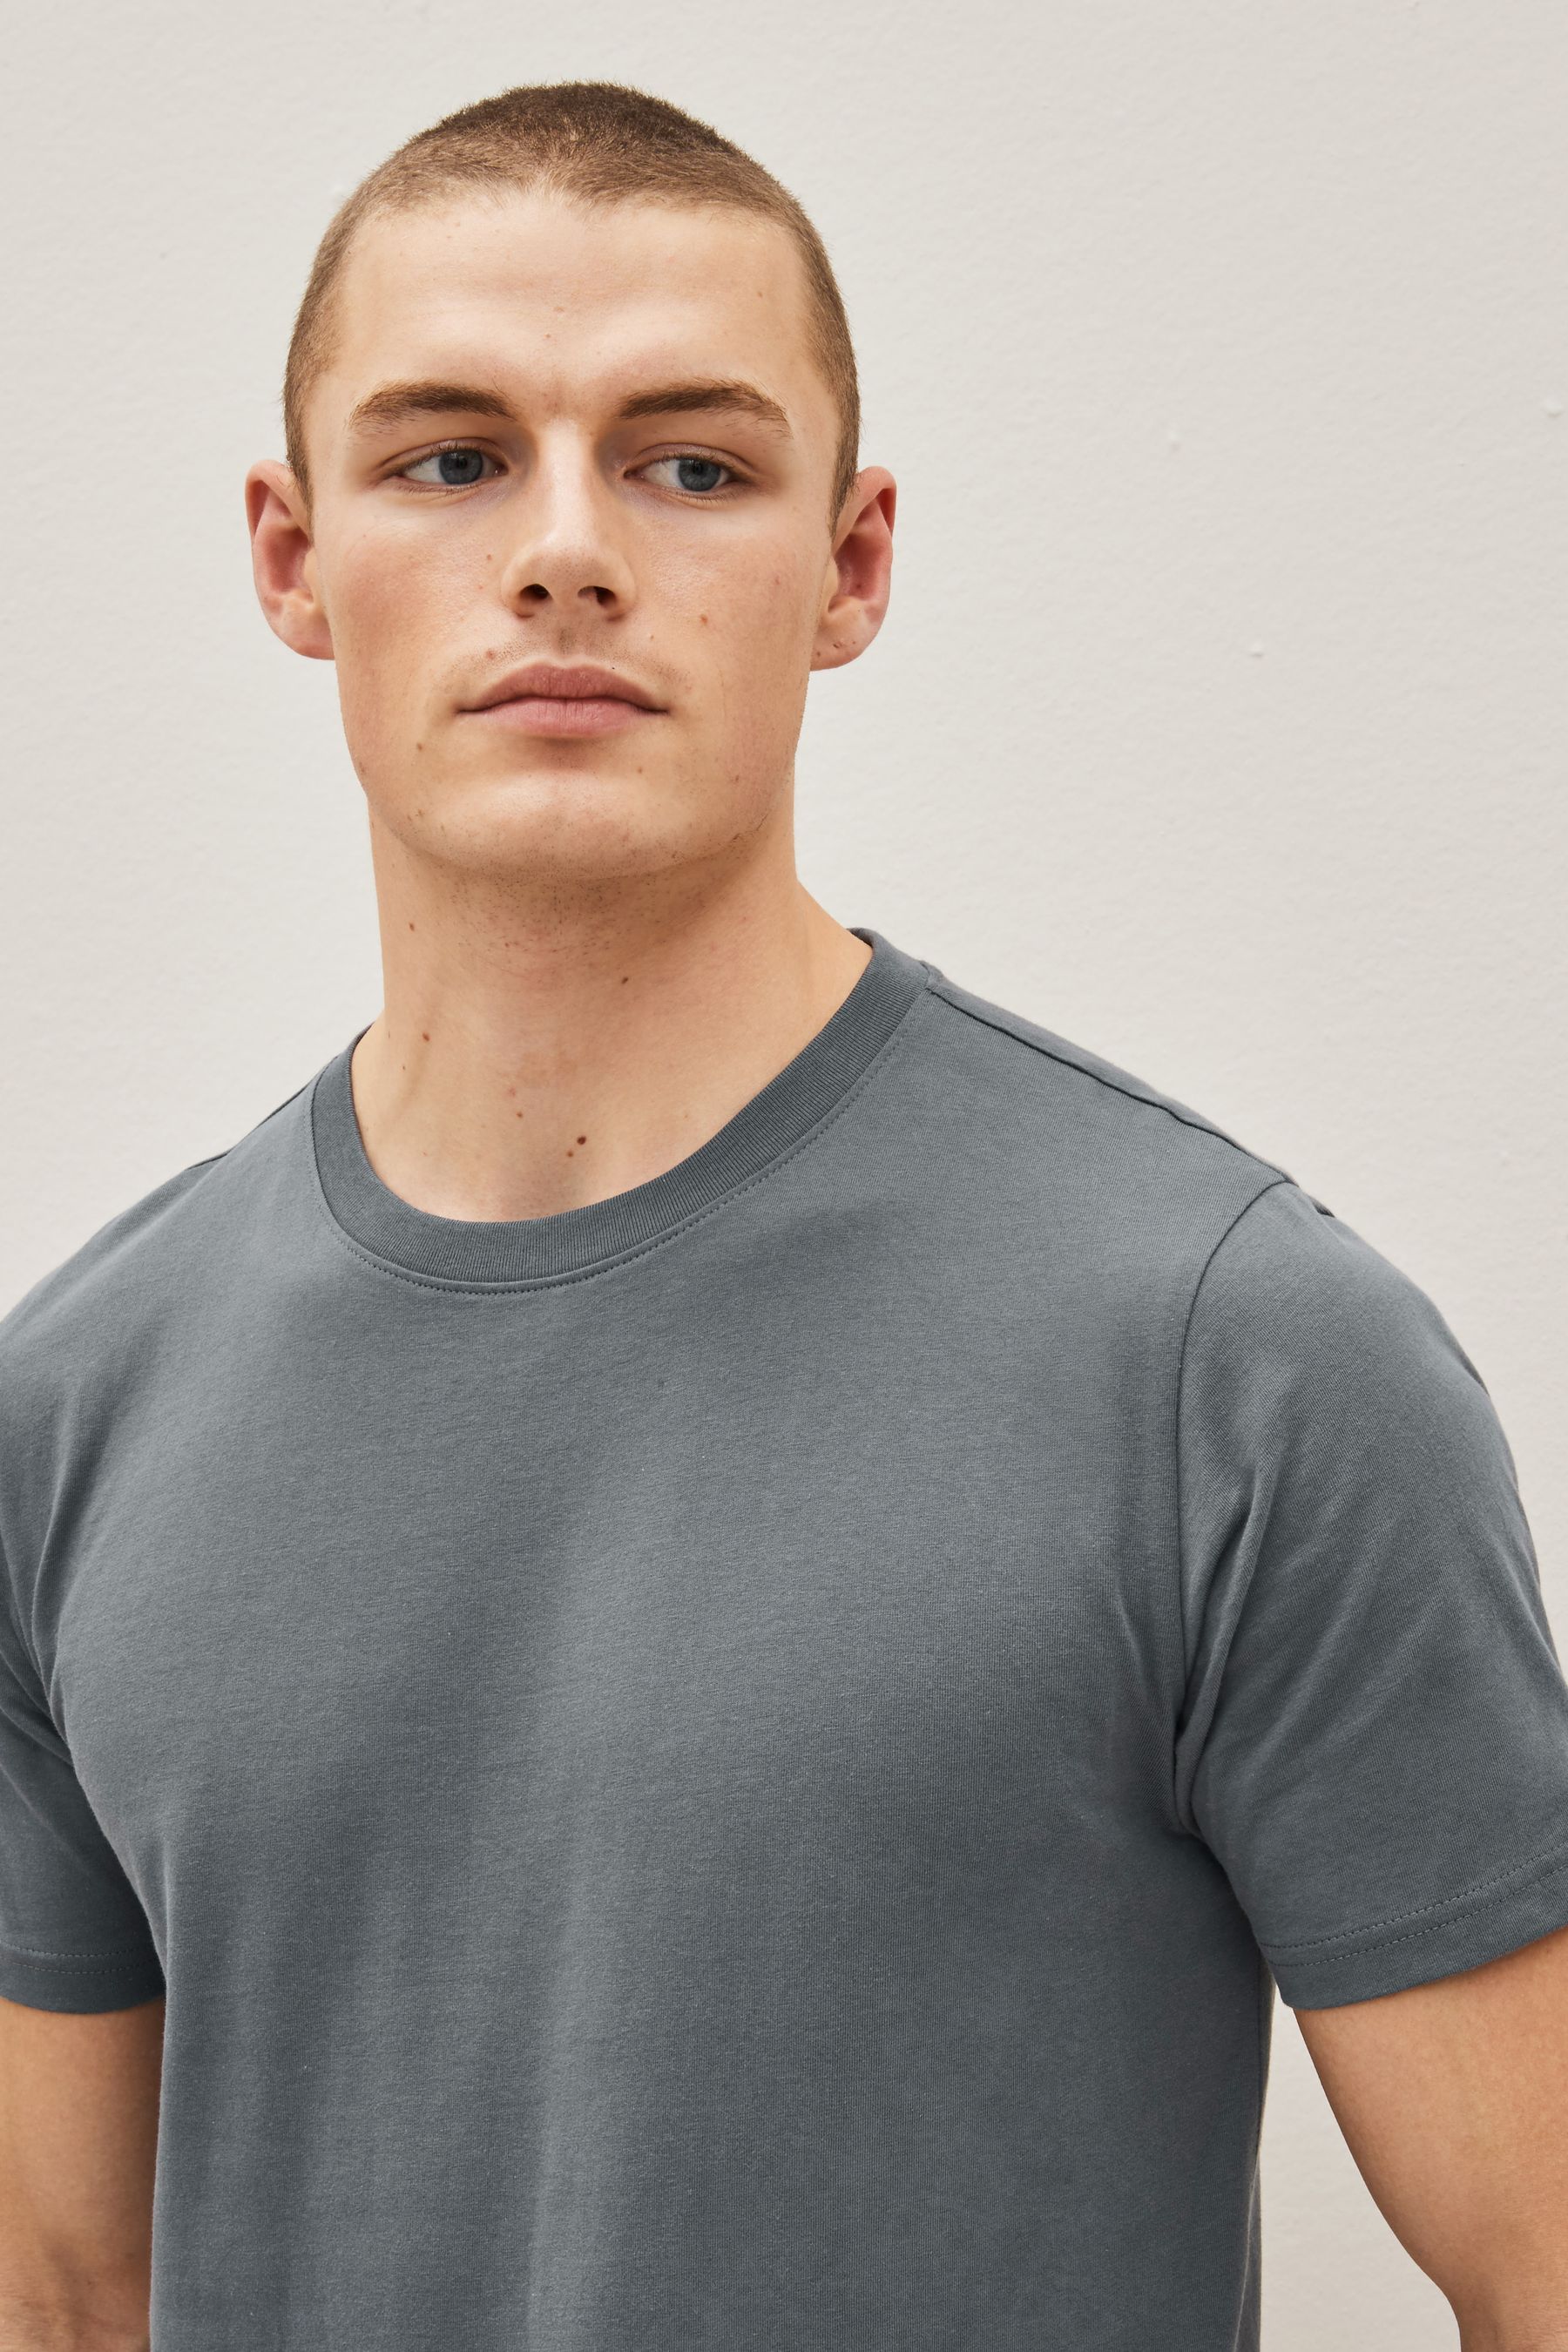 Buy Black/Slate/Grey Marl/White/Navy/Blue Slim T-Shirts 6 Pack from the ...